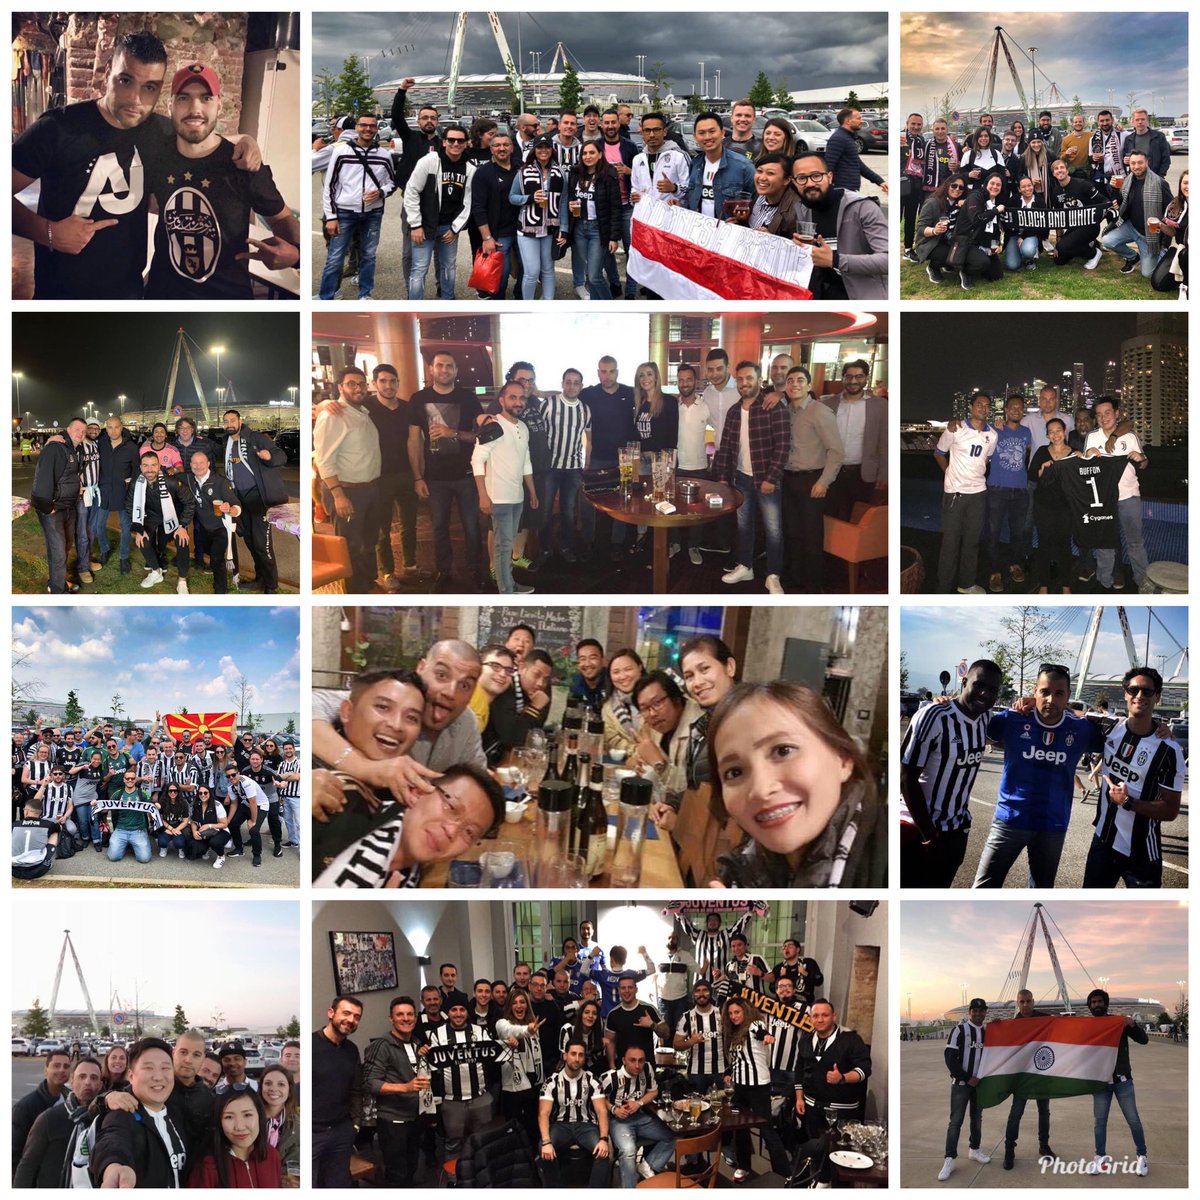 Around Turin
@AroundTurin
Different colors, different countries, different cultures... same love. No to racism. #YourFamilyInTurin 
4:16 AM - 2 Jun 2020